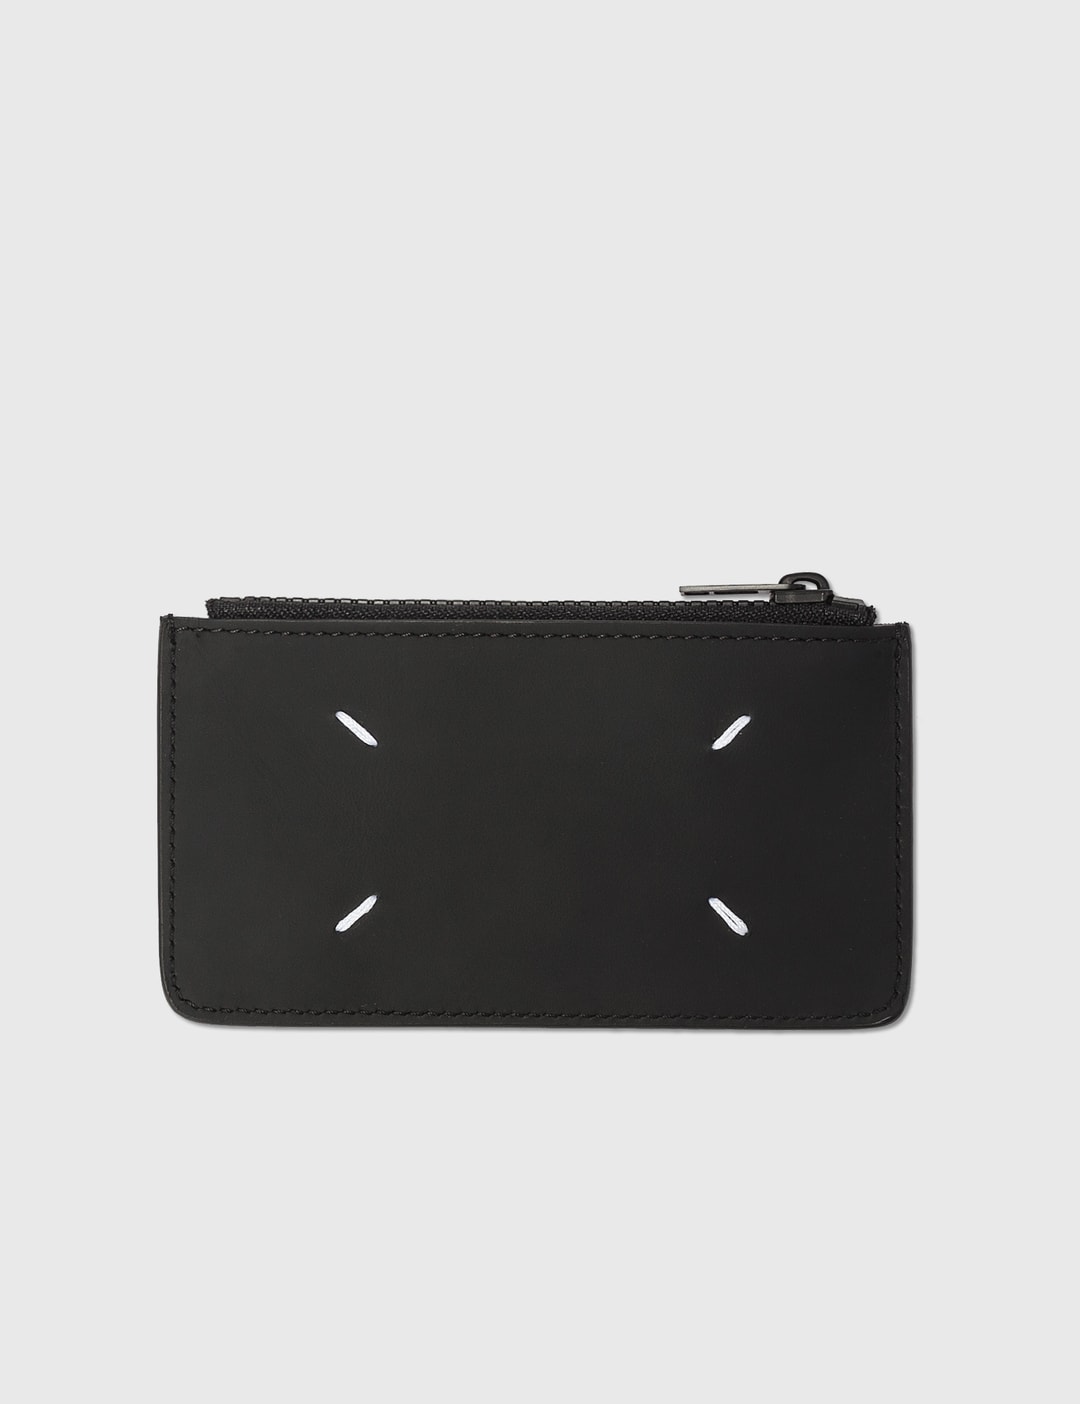 Human Made - Leather Wallet  HBX - Globally Curated Fashion and Lifestyle  by Hypebeast